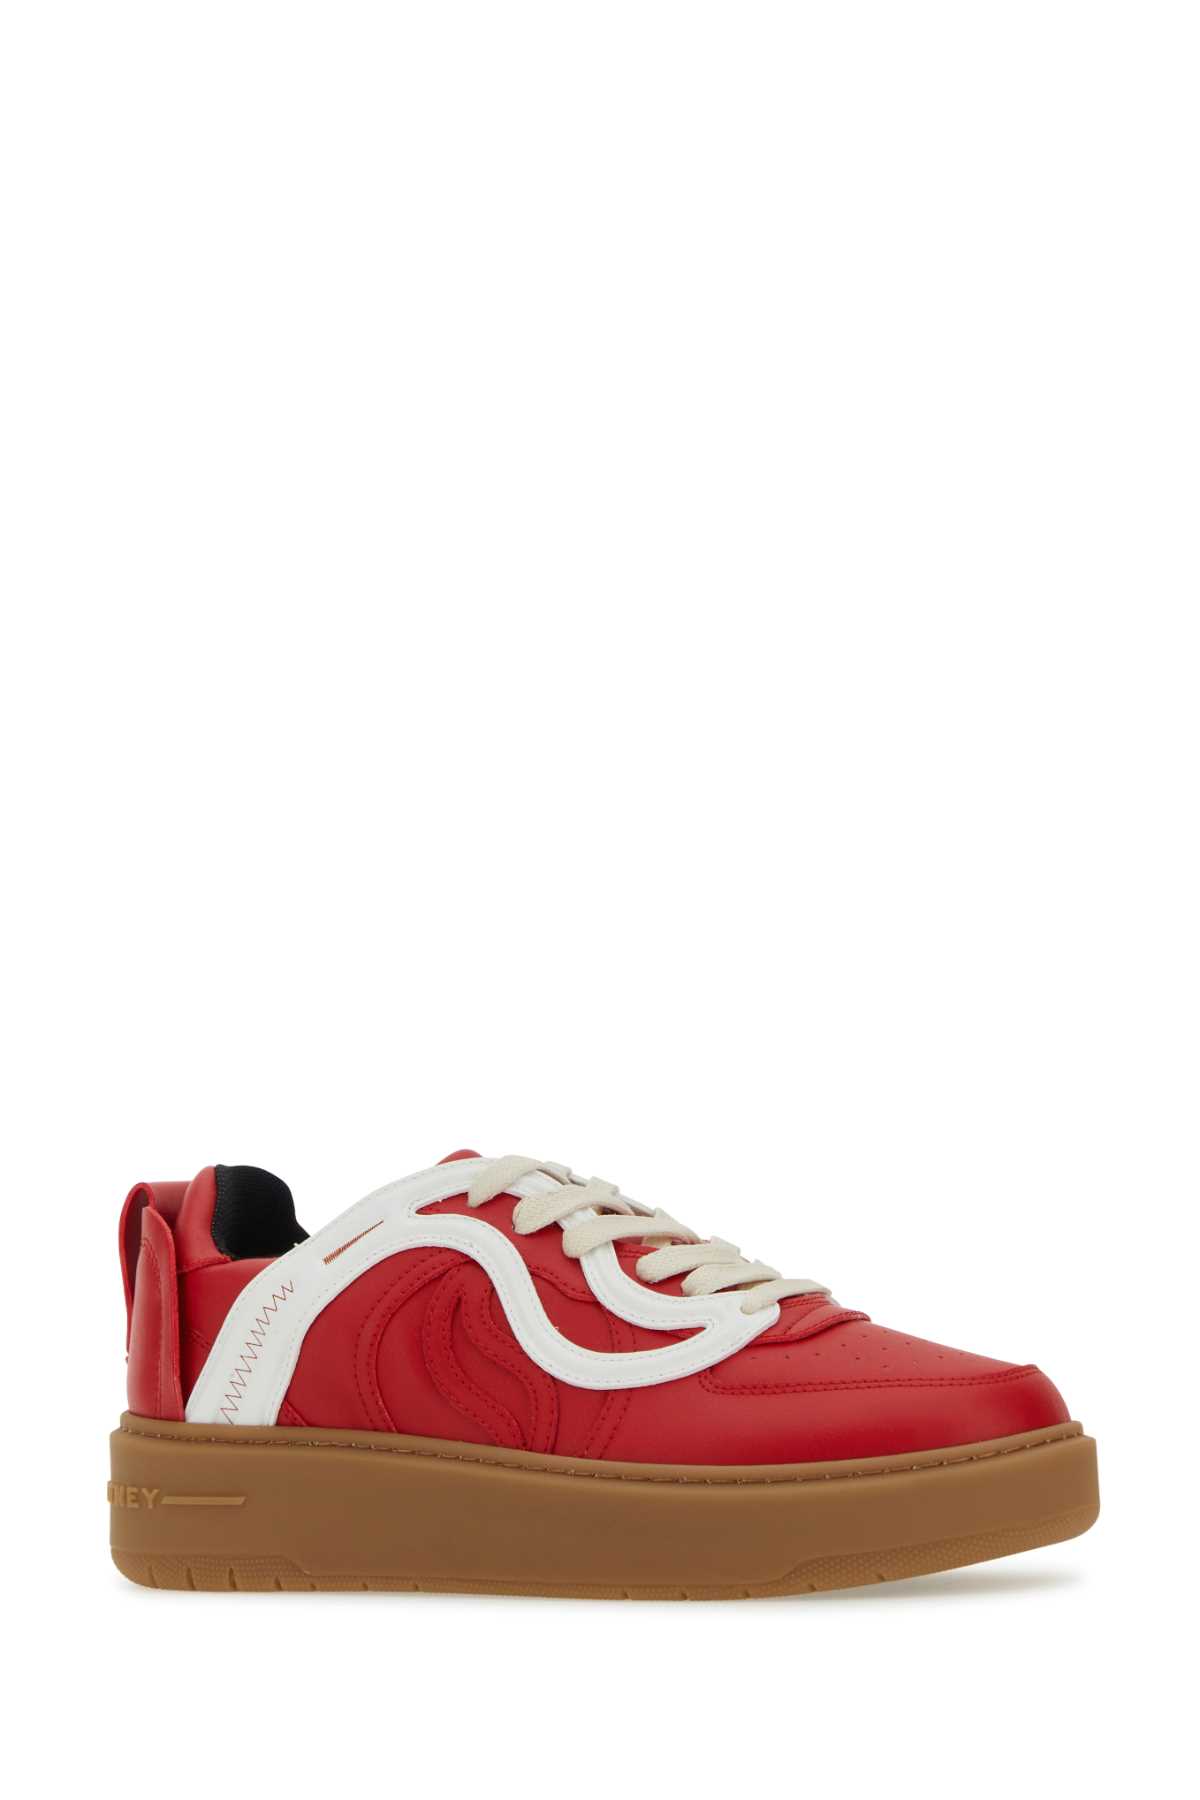 STELLA MCCARTNEY RED SYNTHETIC LEATHER S-WAVE 1 SNEAKERS